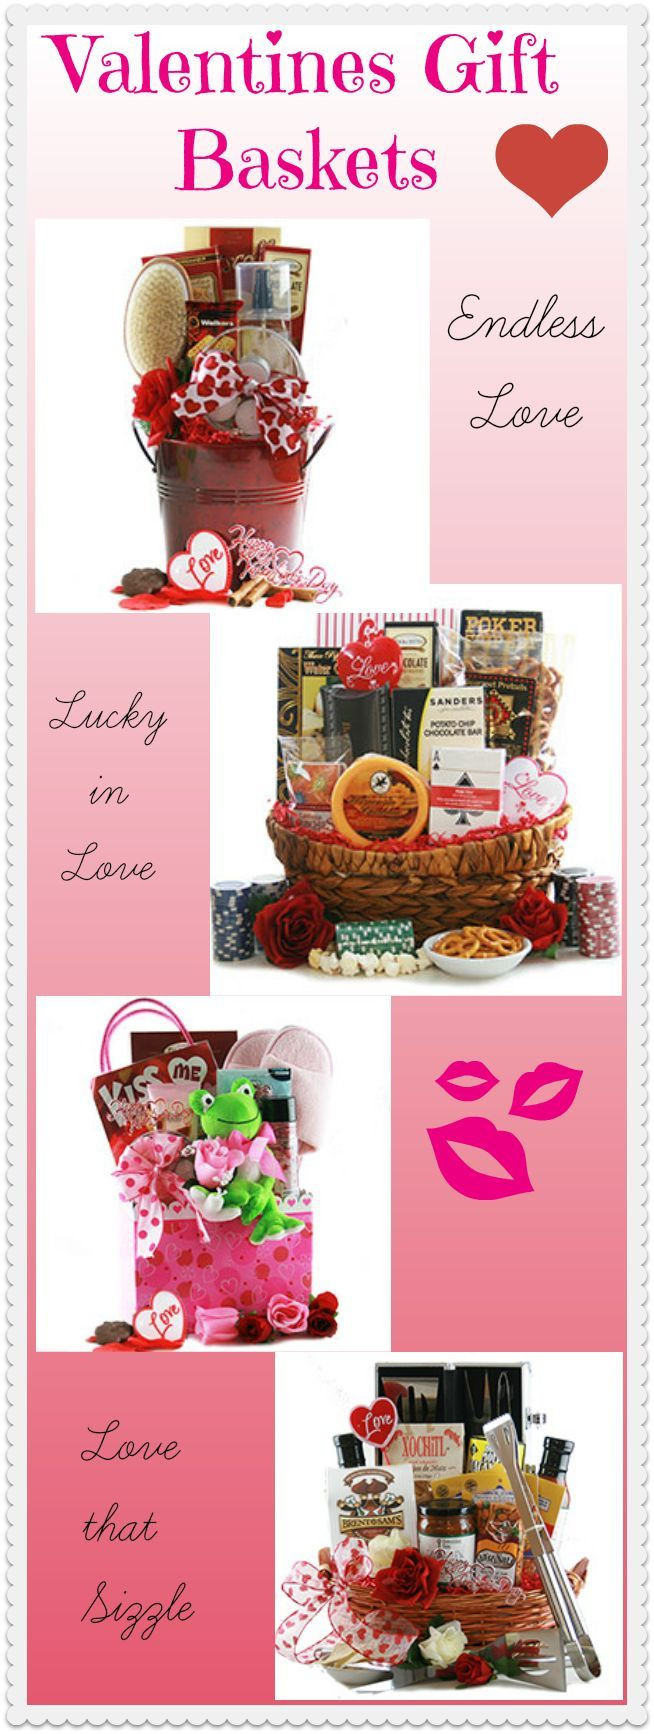 Send Valentines Day Gift
 Custom Valentines Day Gift Baskets For that someone